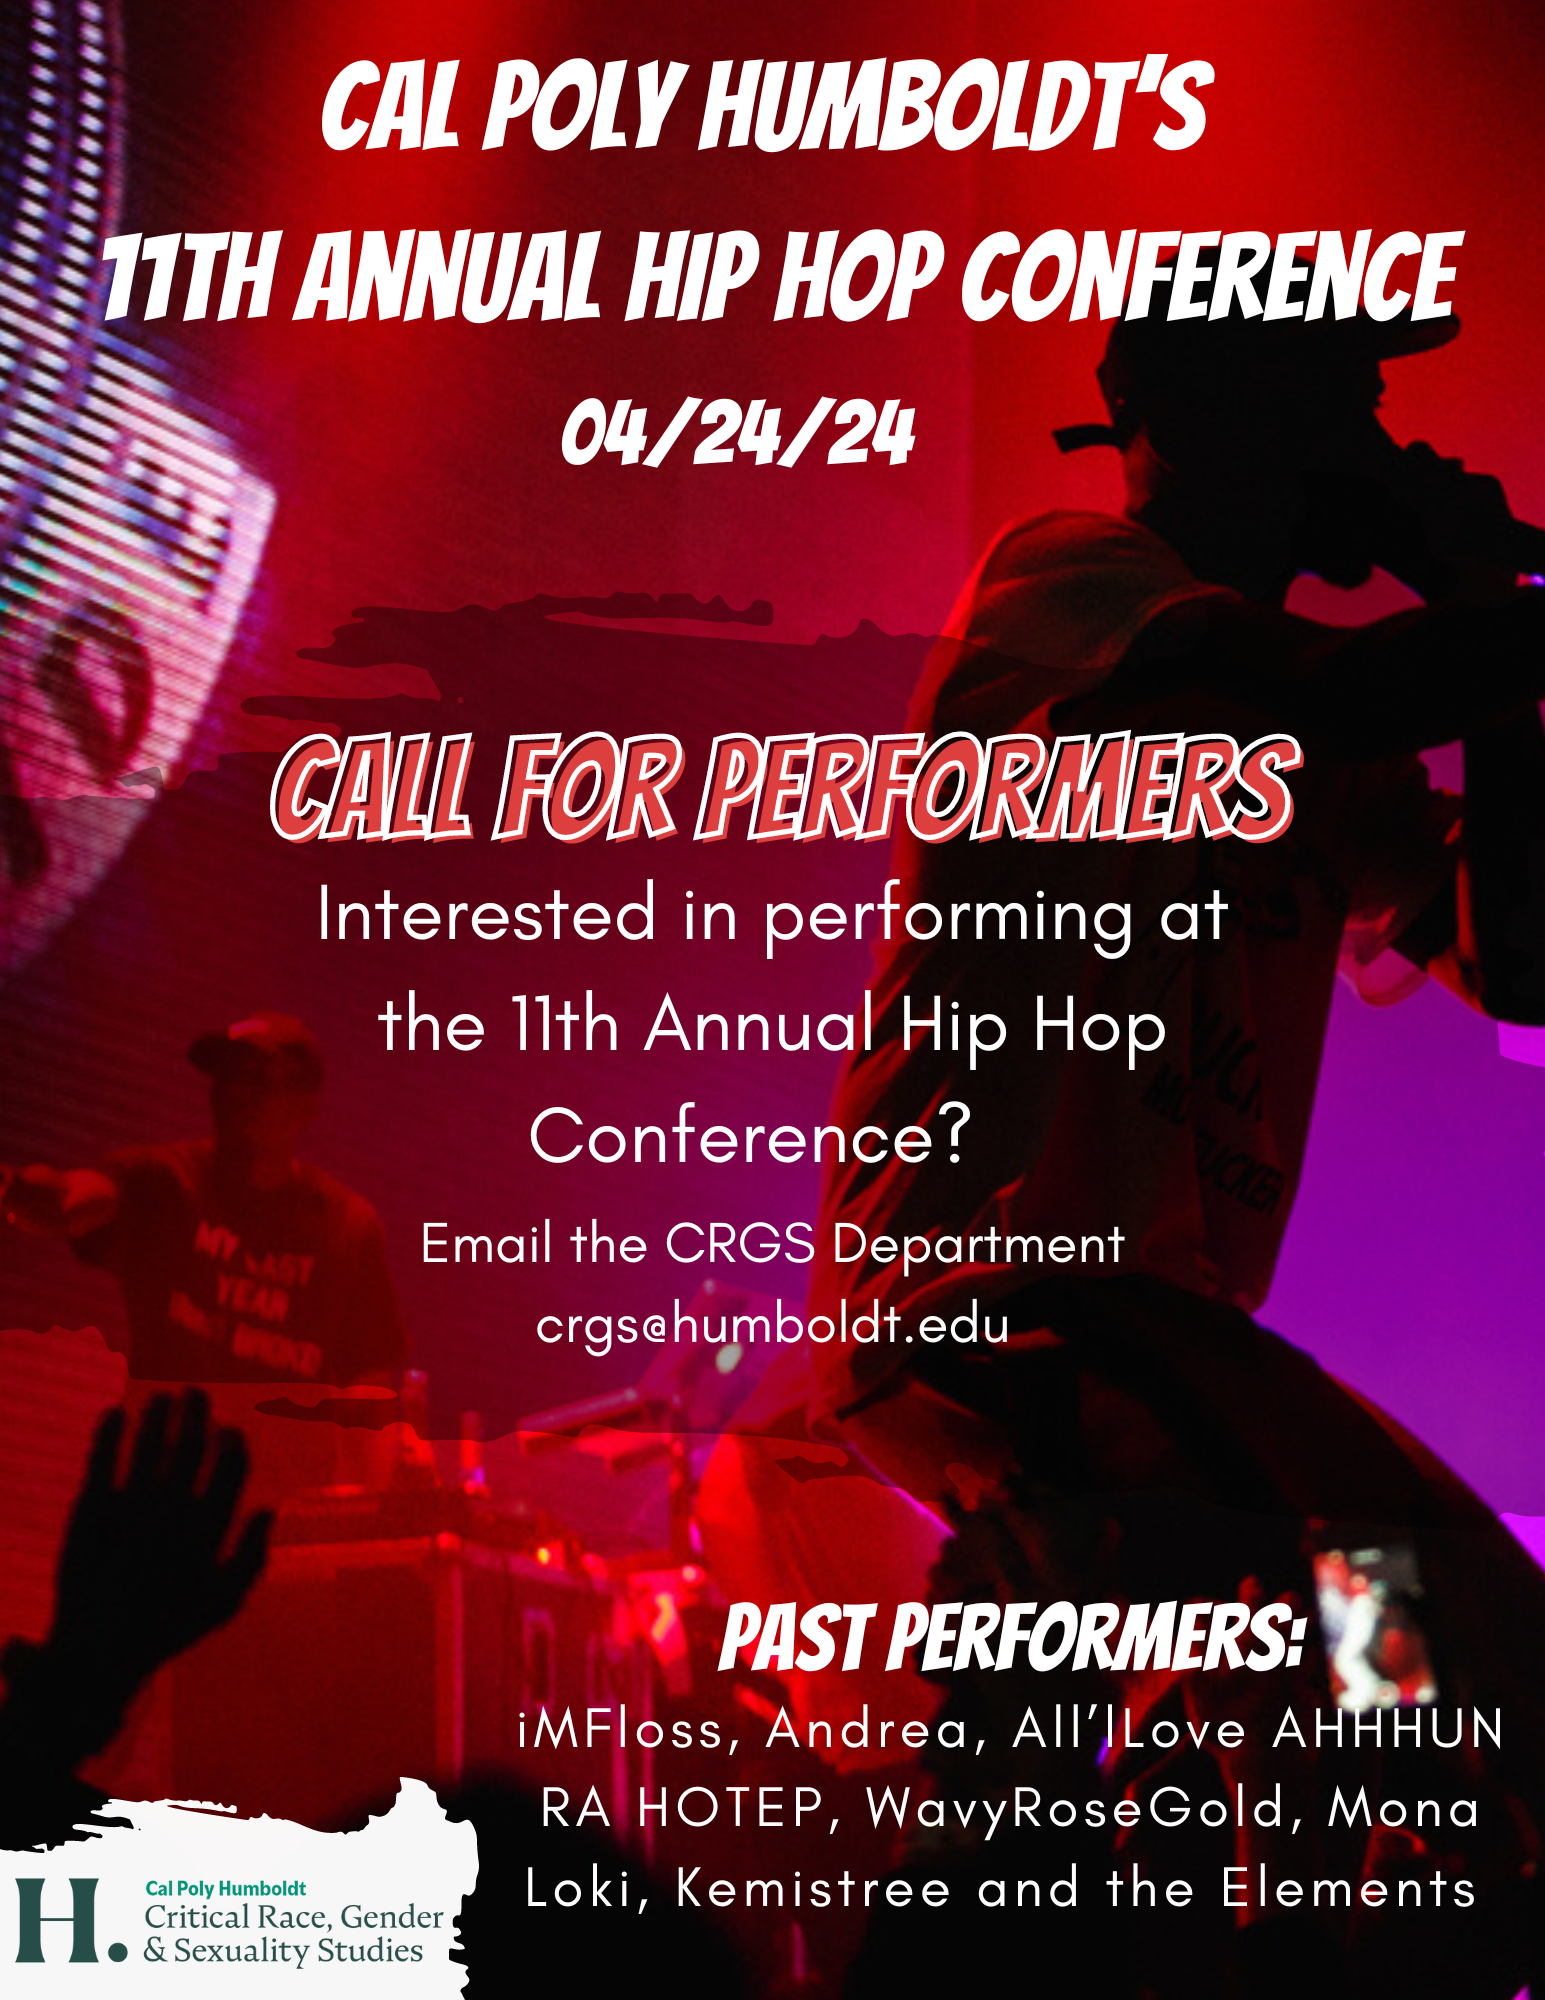 11th Annual Hip Hop Conference Call for Performers